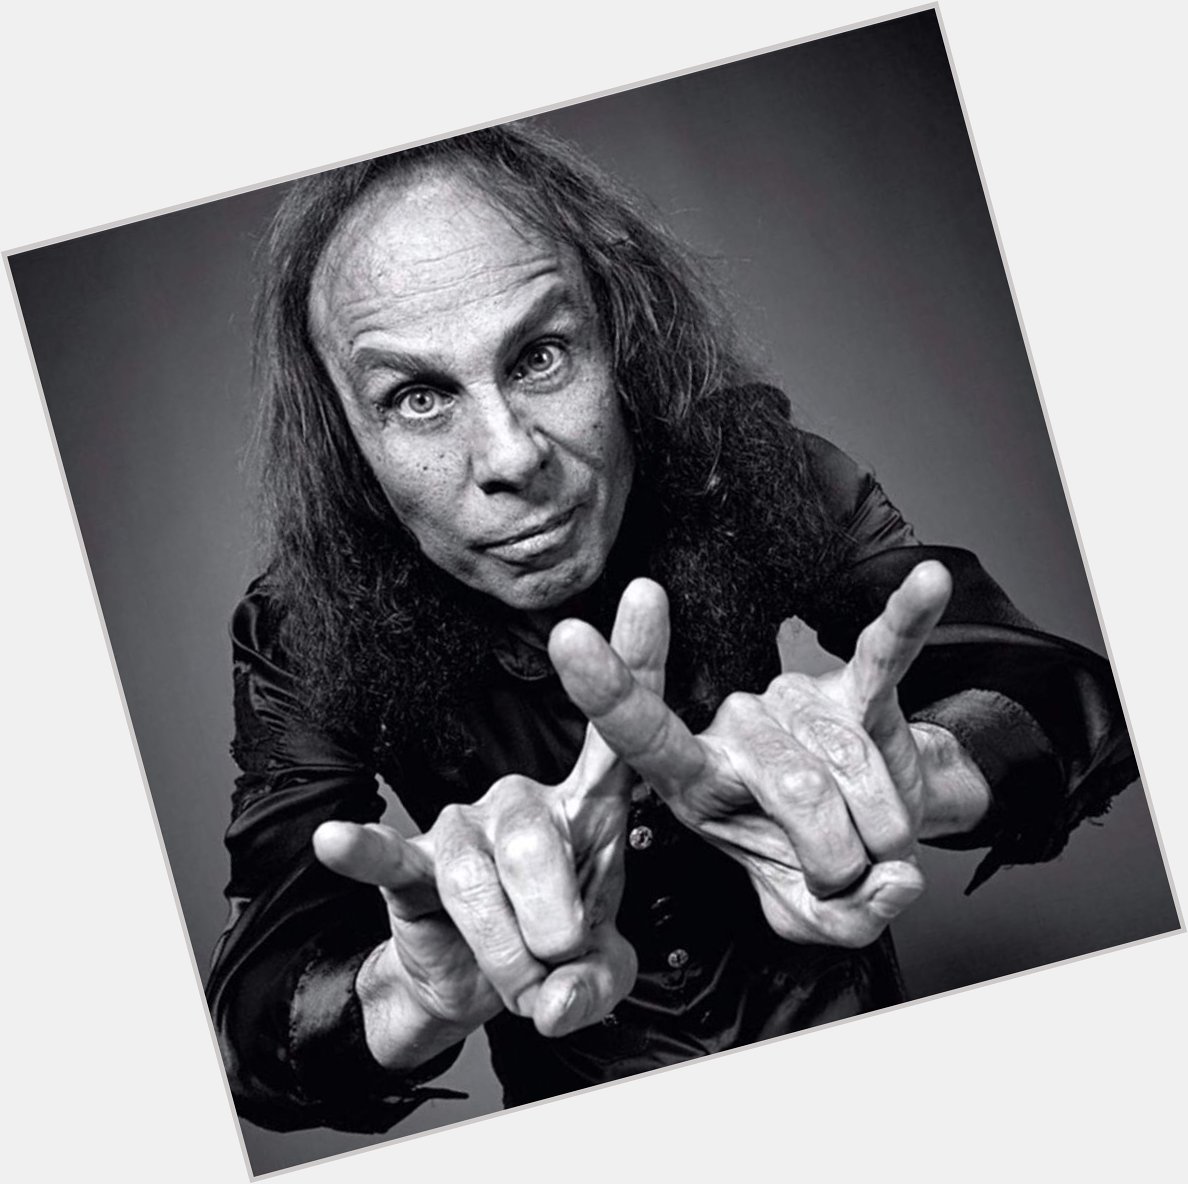 Happy 75th Birthday to another legend in the sky

\\m/ Ronnie James Dio \\m/ 